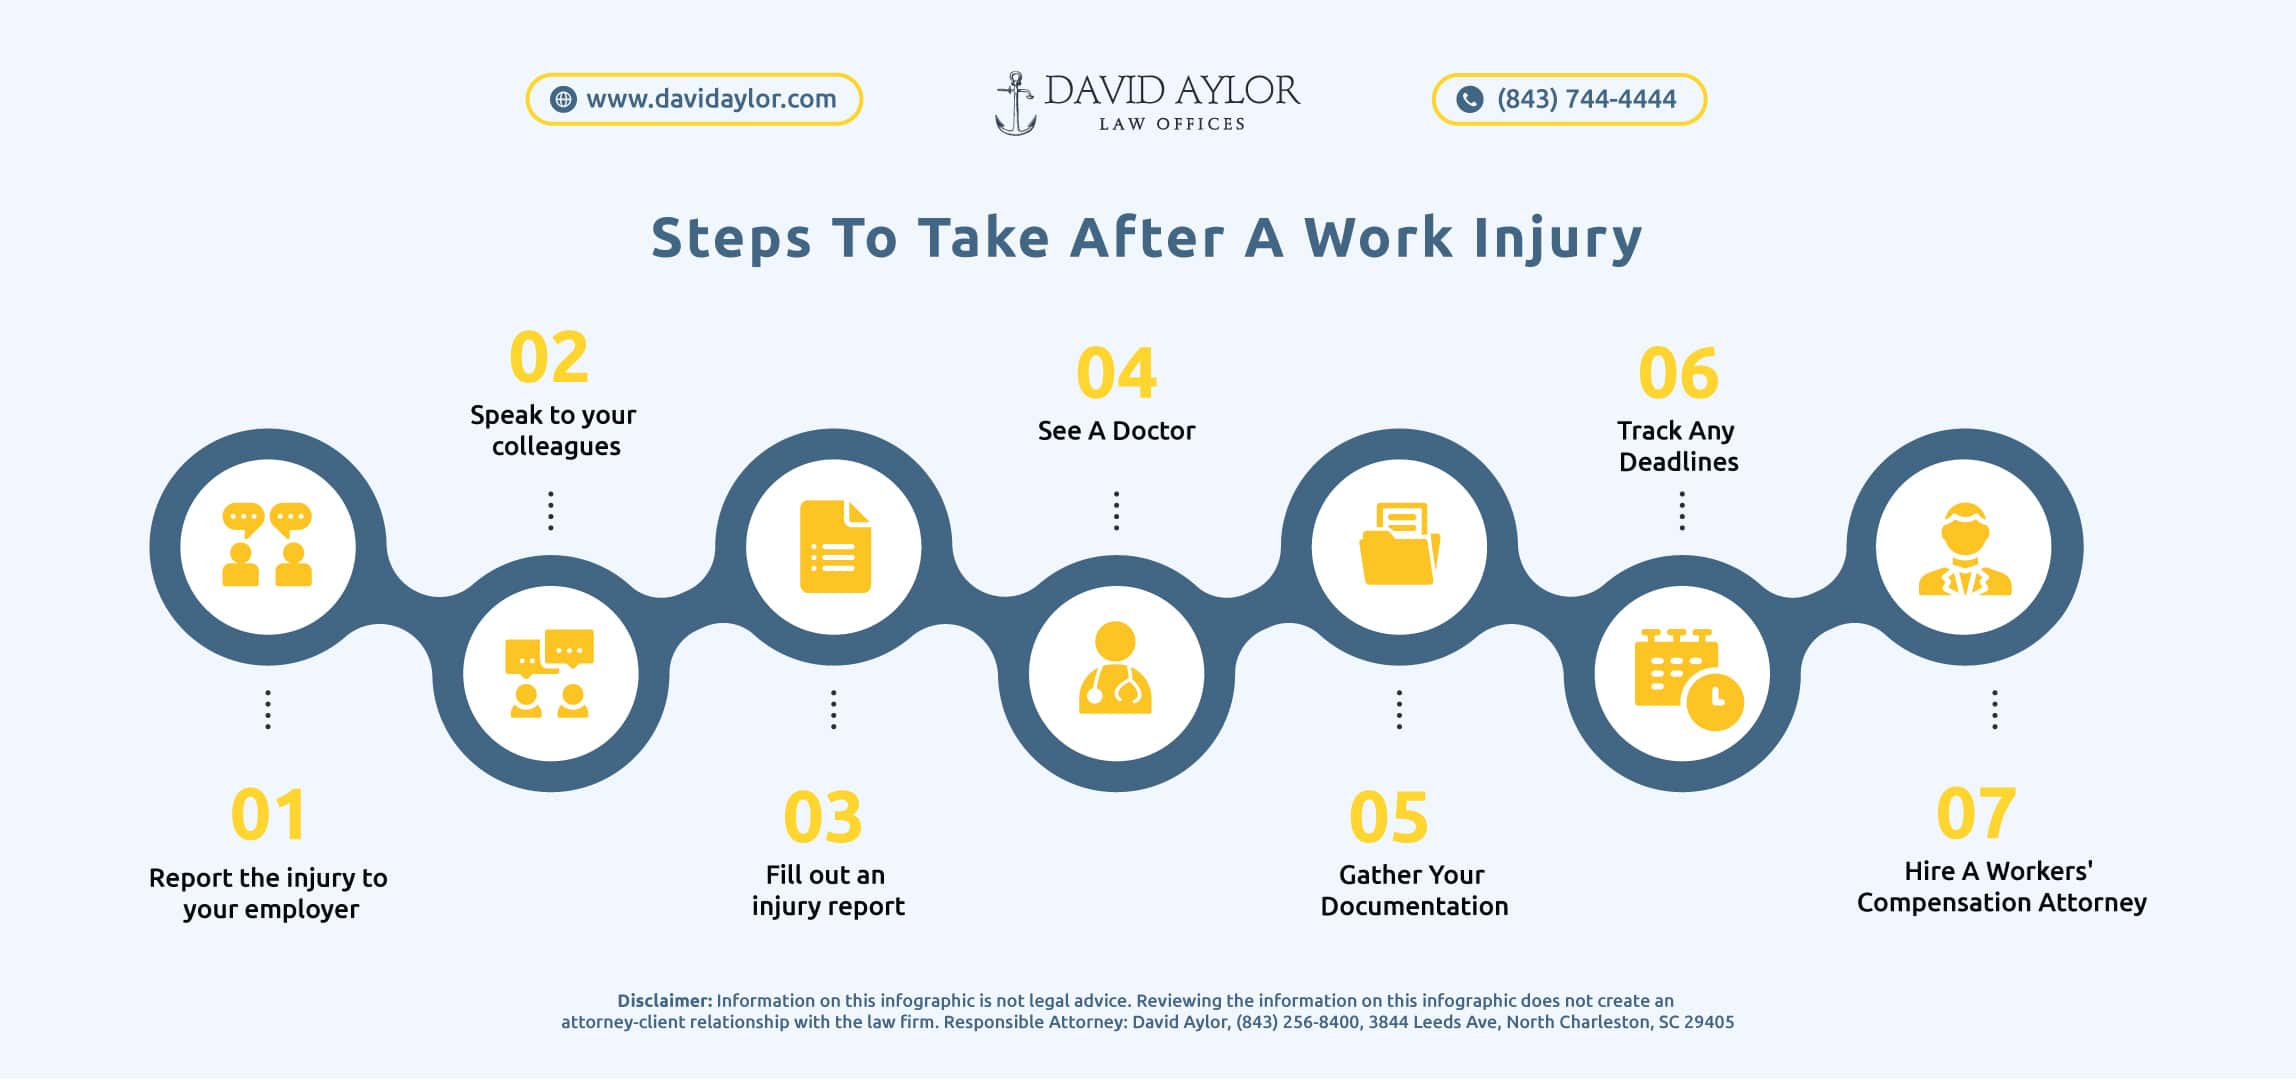 Steps To Take After A Work Injury